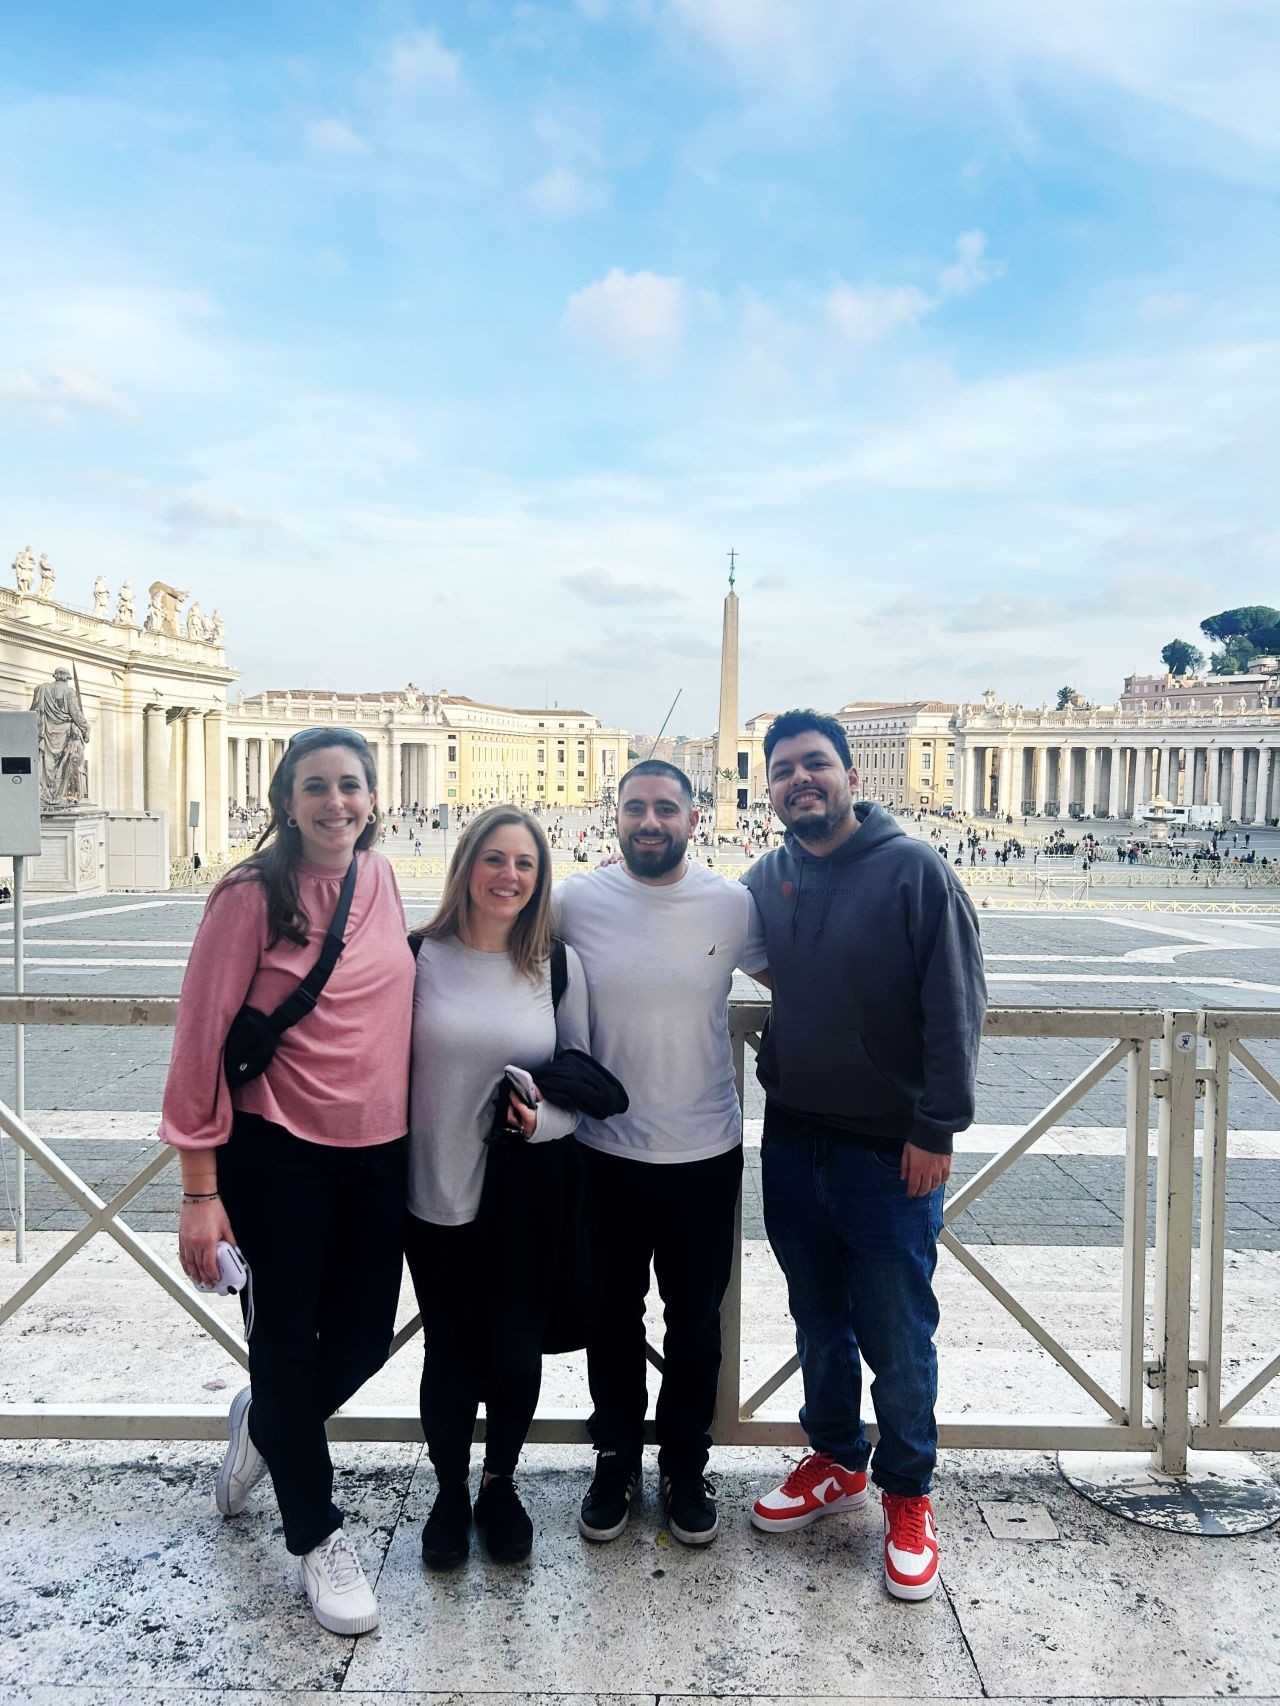 The People team exploring Rome!